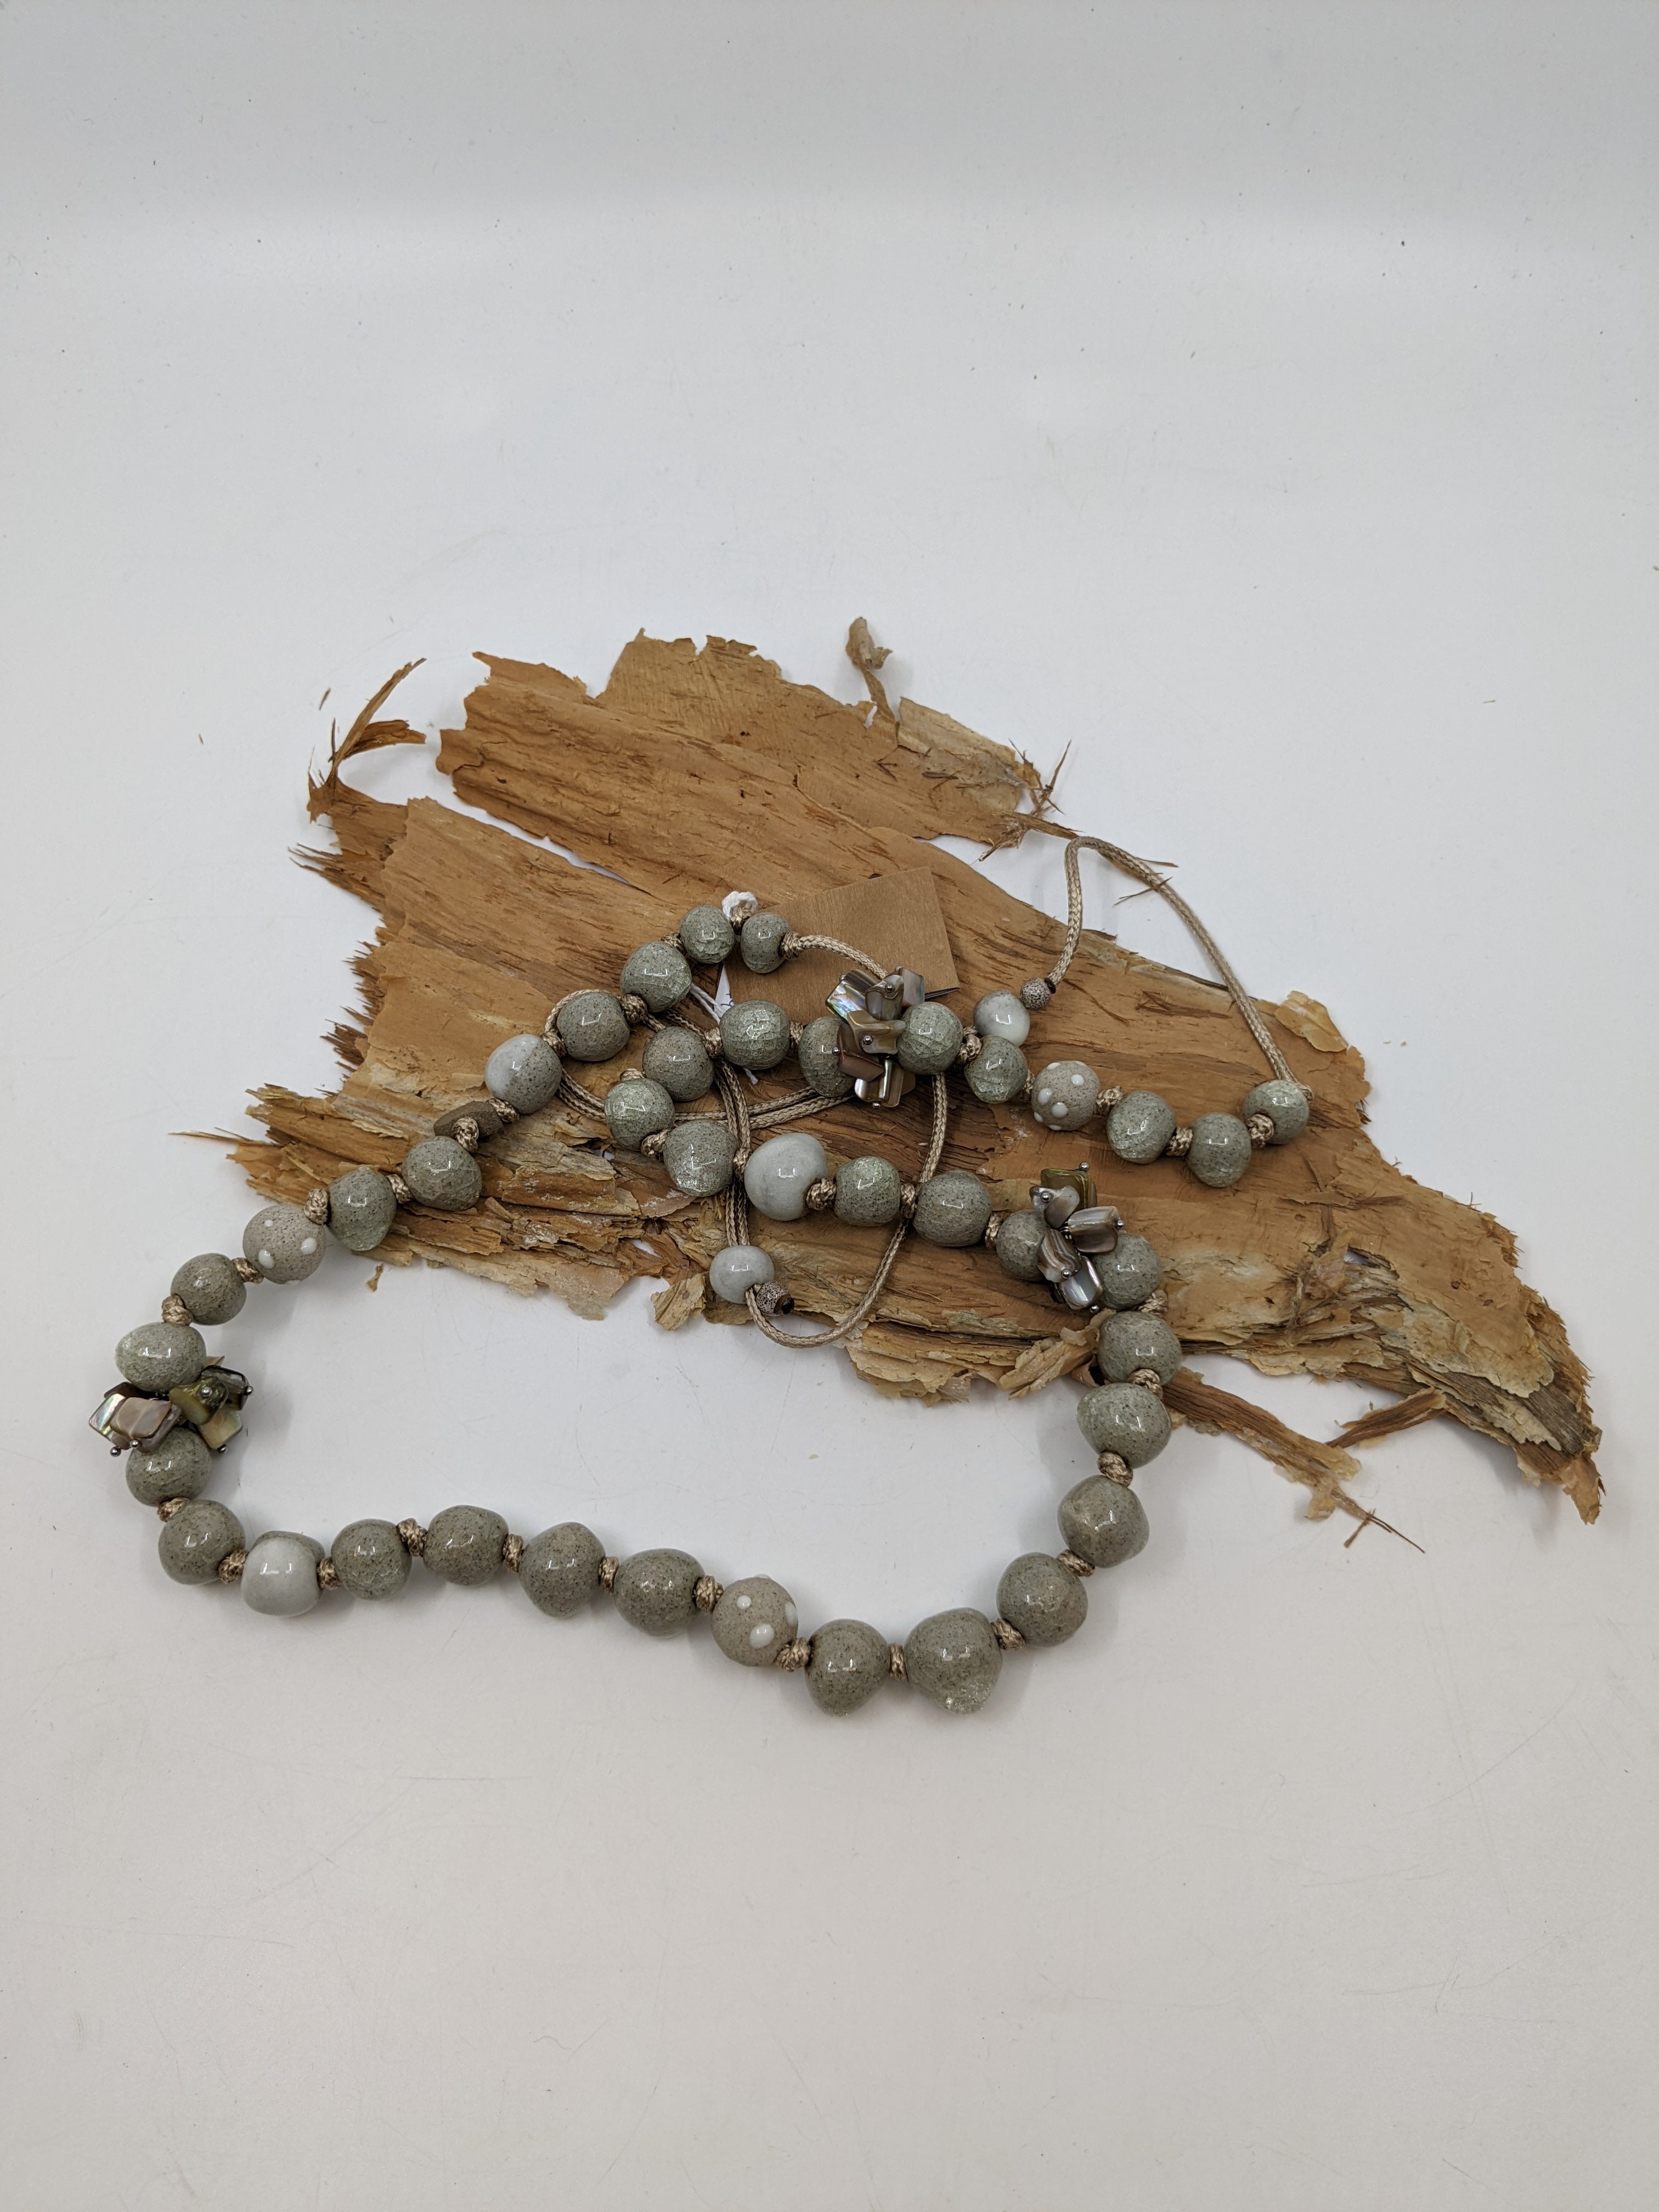 Long Bead Necklace with Shells Ceramics Julia Bramich 